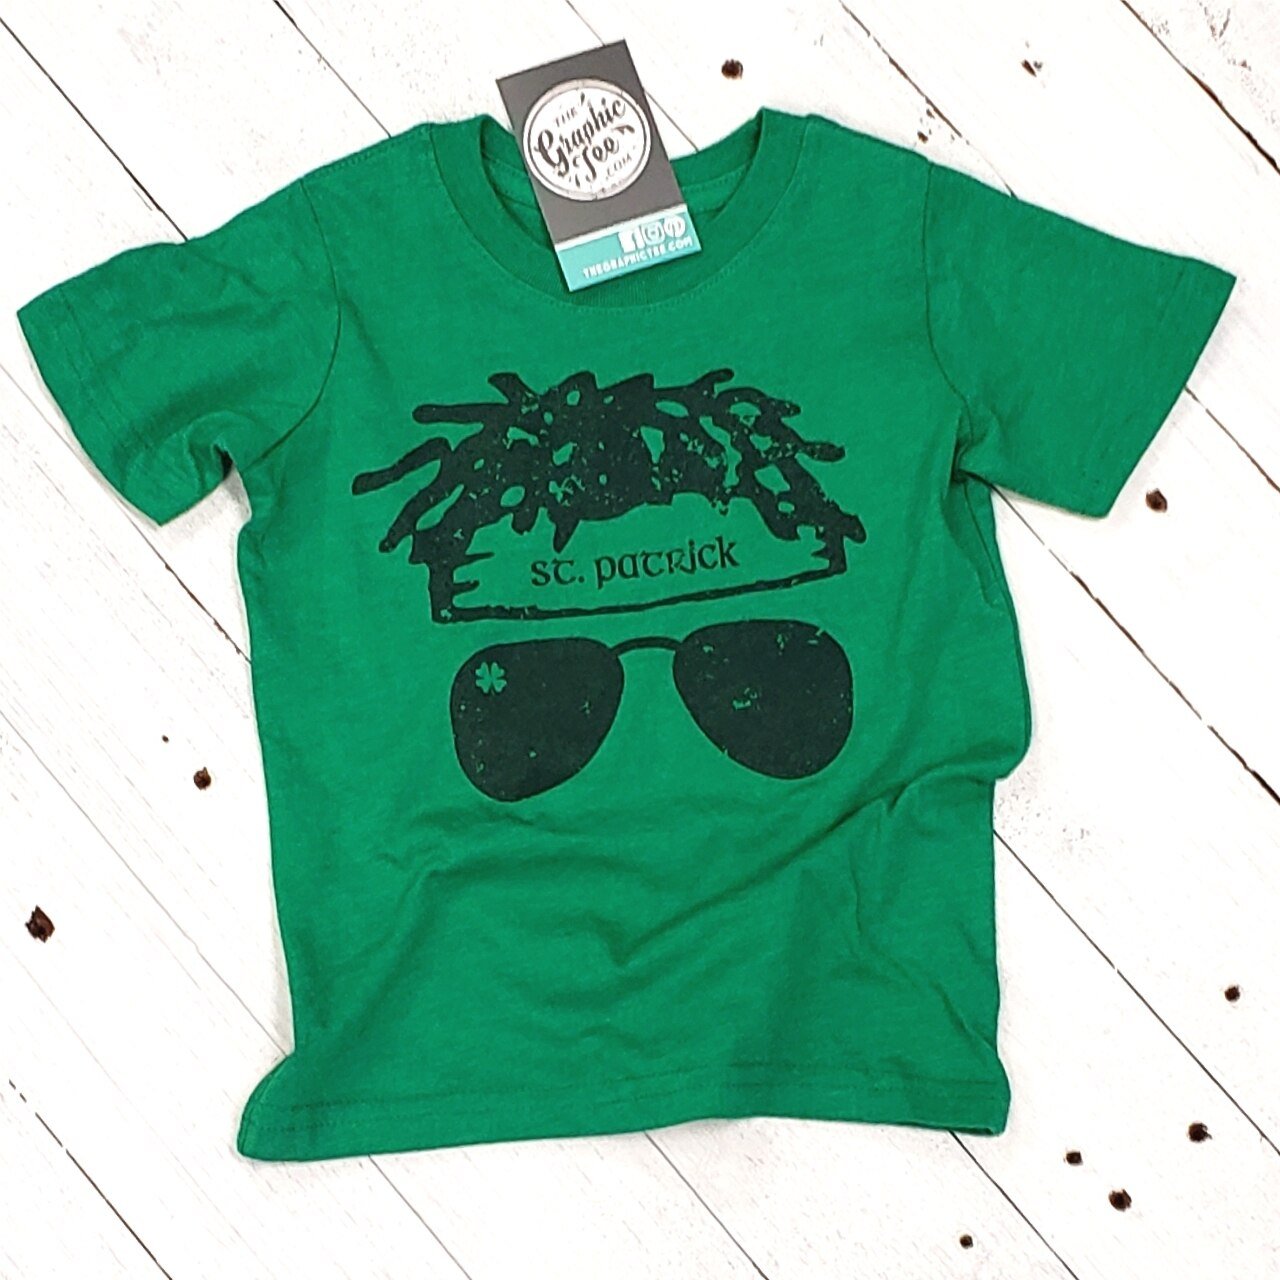 Youth St. Patrick Tee - The Graphic Tee